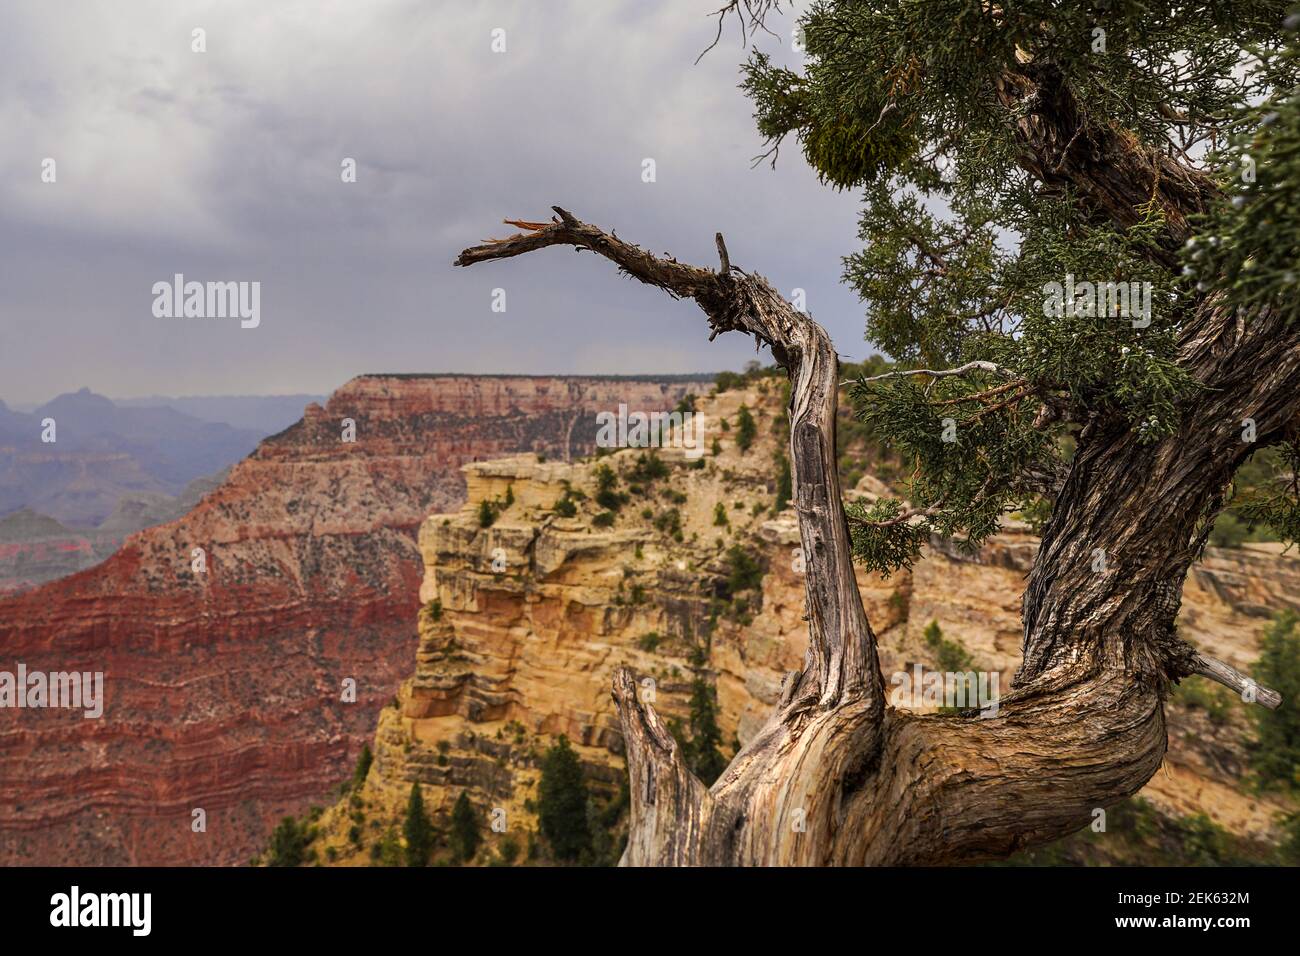 Gnarled tree looking over the rim of Grand Canyon on a hazy day Stock Photo